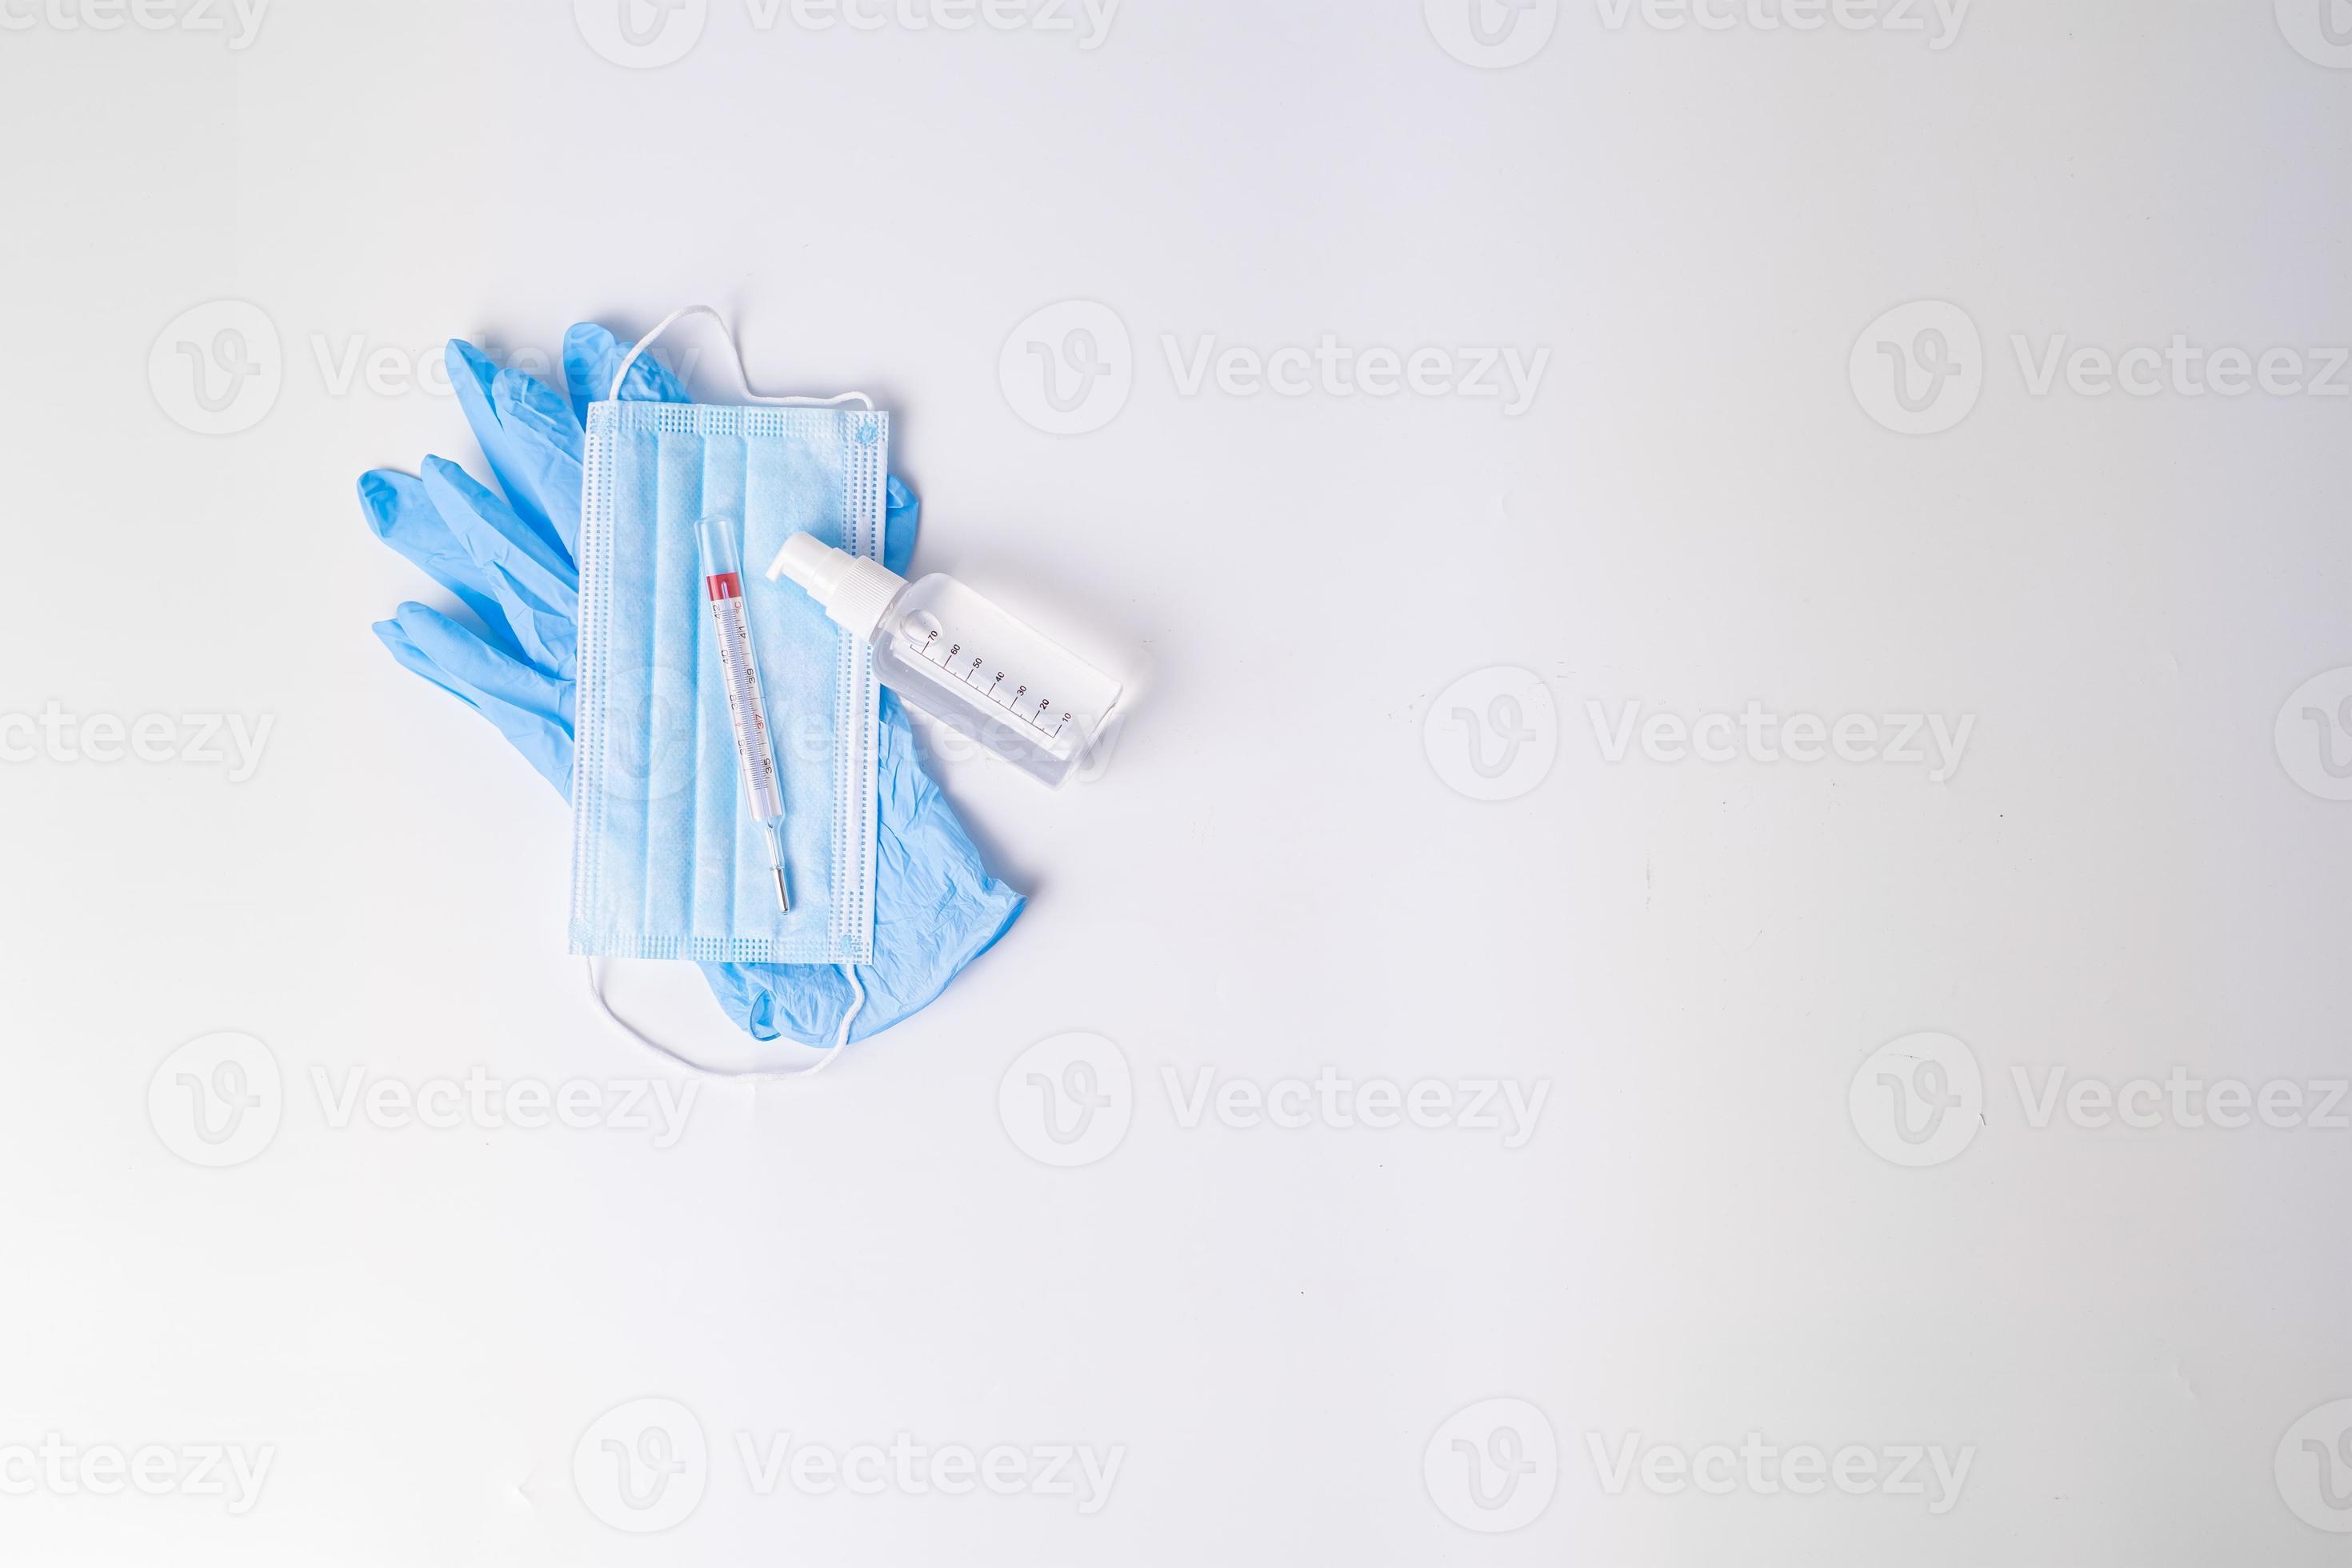 Nitrile gloves with hydroalcoholic gel surgical mask and thermometer photo